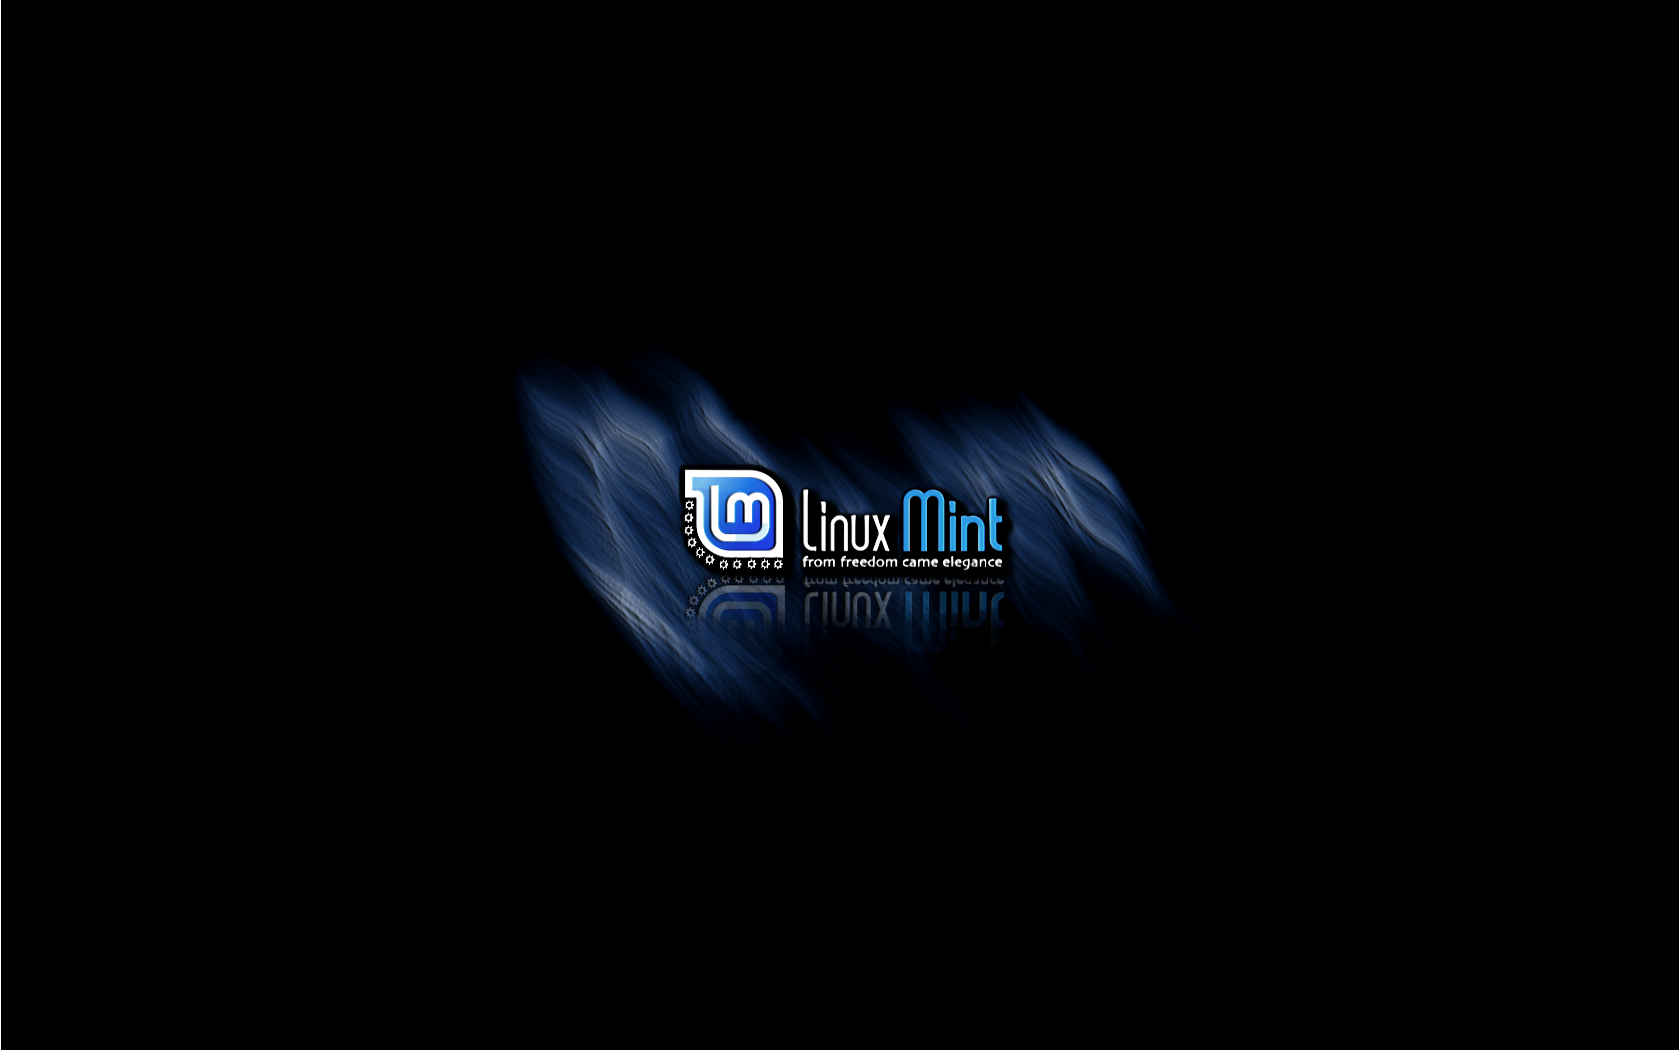 This is my rendition of the Linux Mint KDE logo bathing in a blue 3D fire.